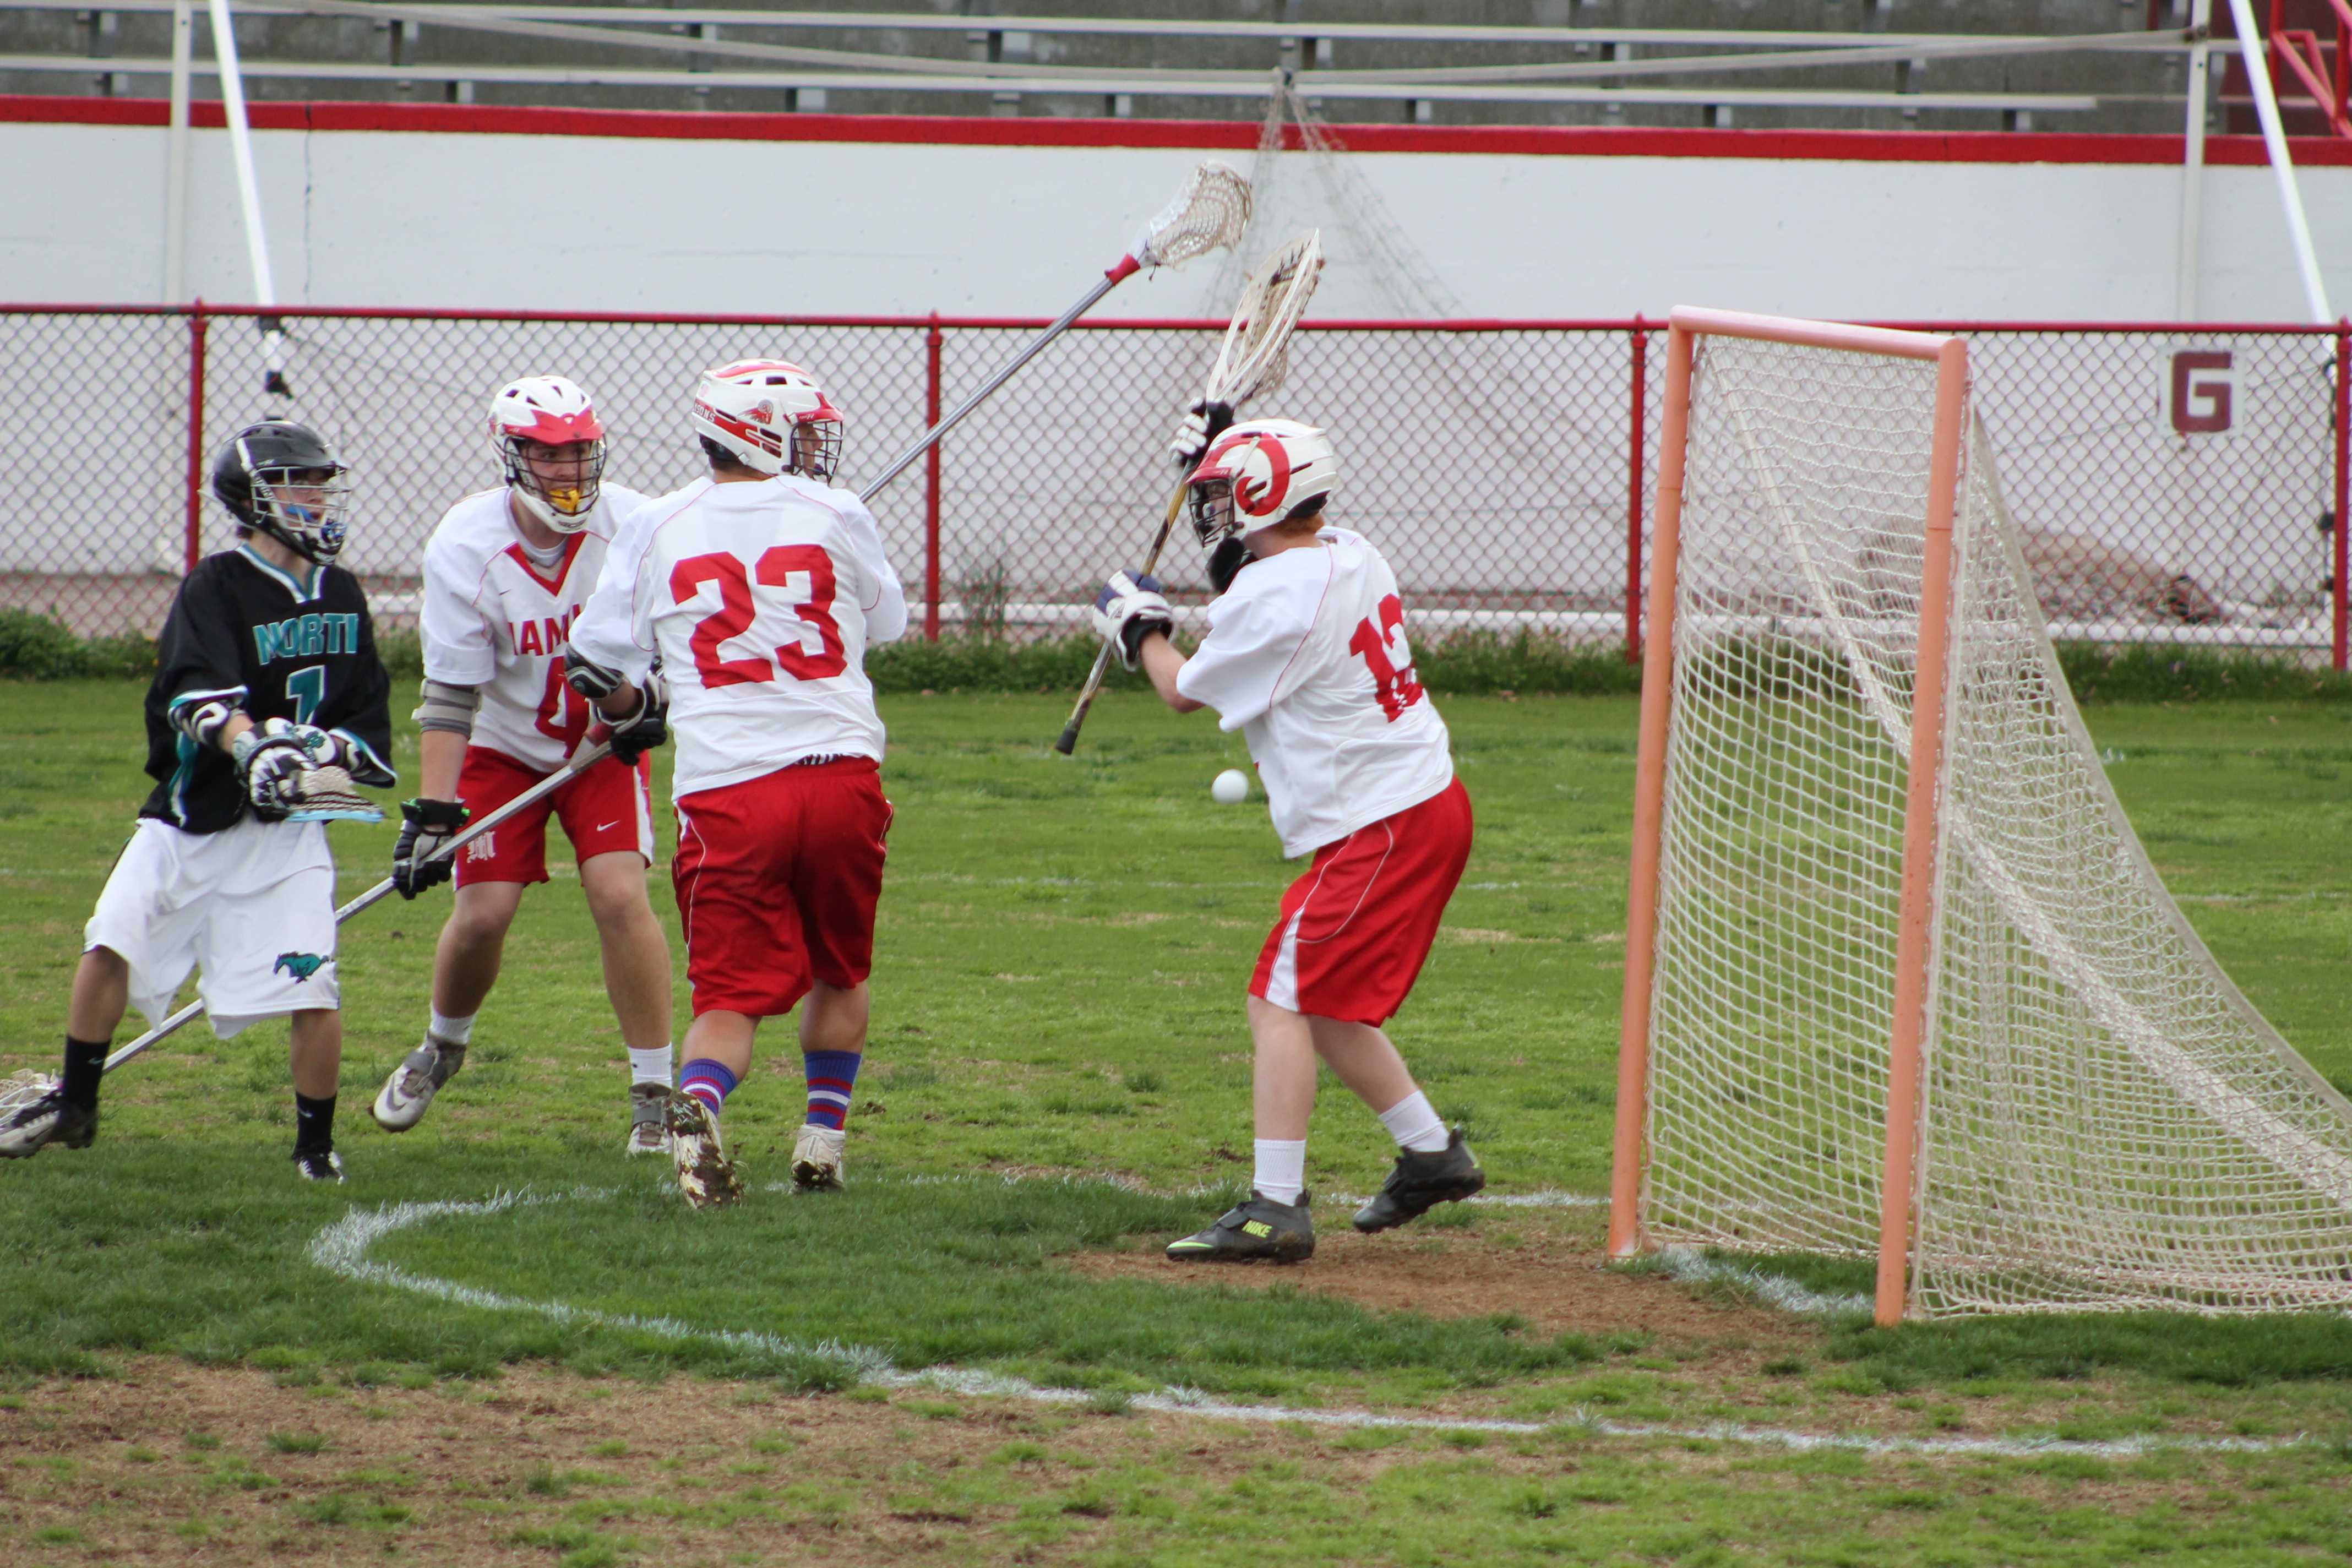 Goalie John Biggs (12, #12) prepares to block a shot on goal with his net. However, the ball instead hit Biggs in the side and missed the goal.